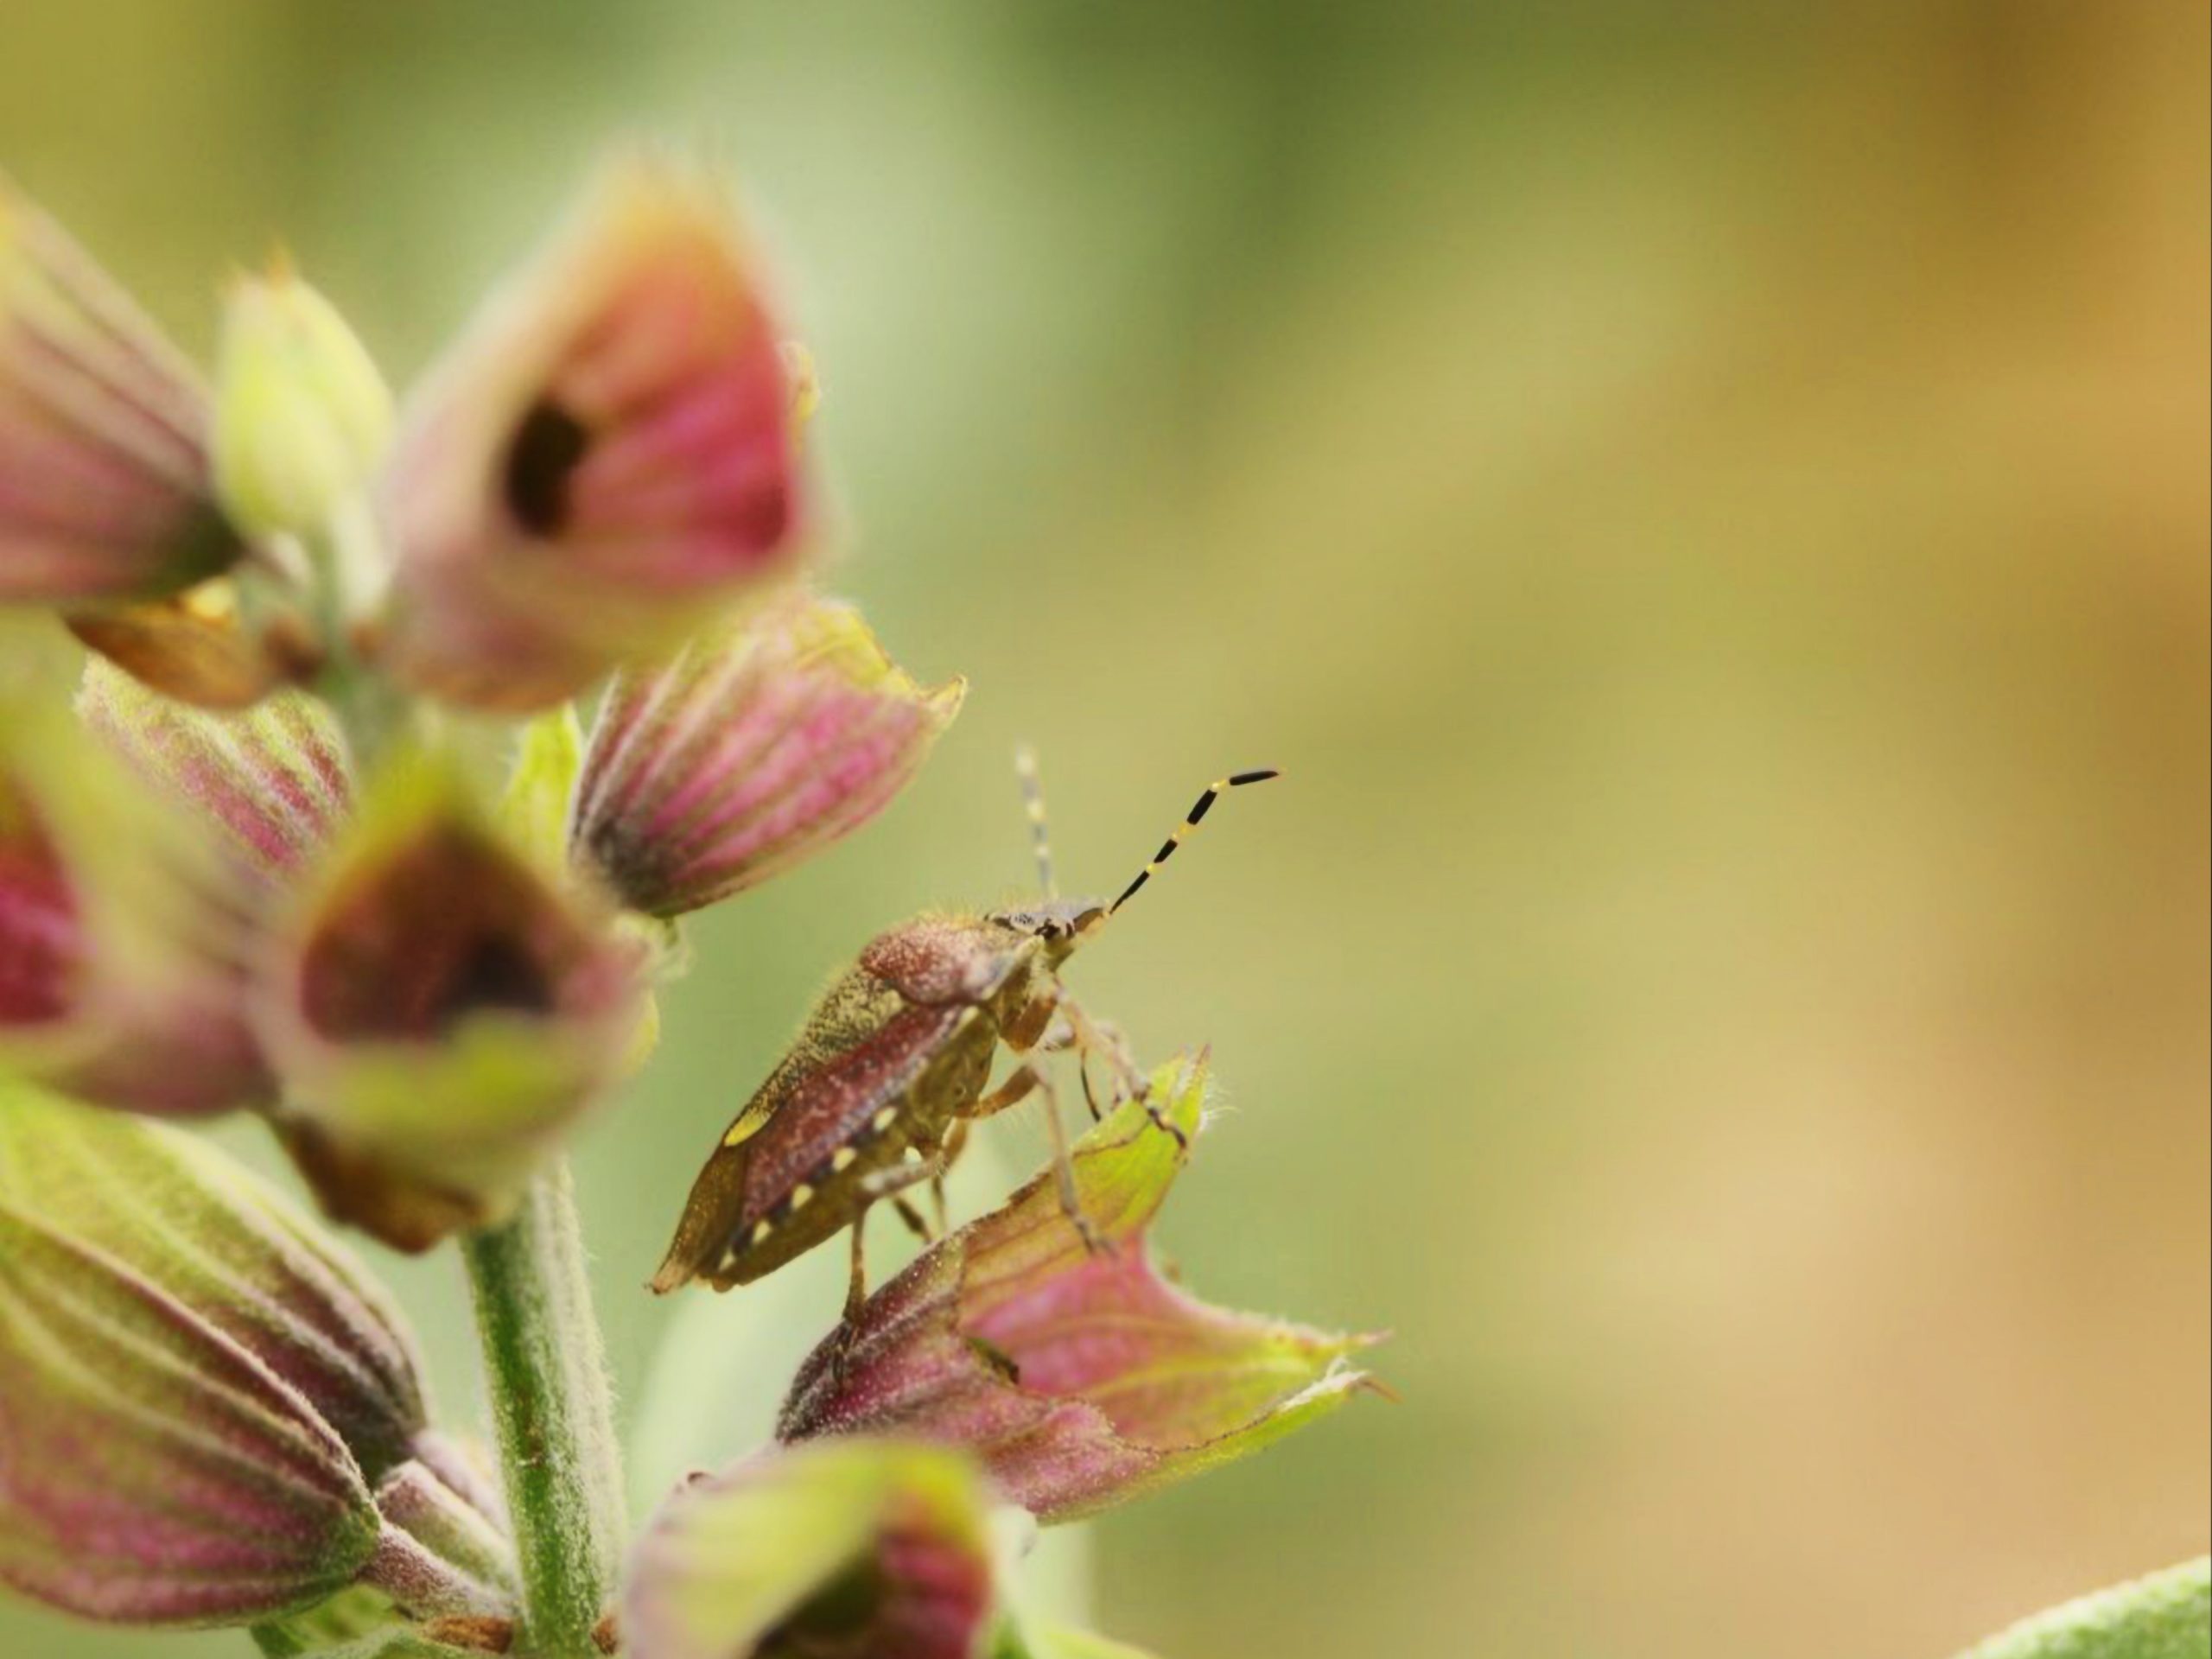 An insect on a plant